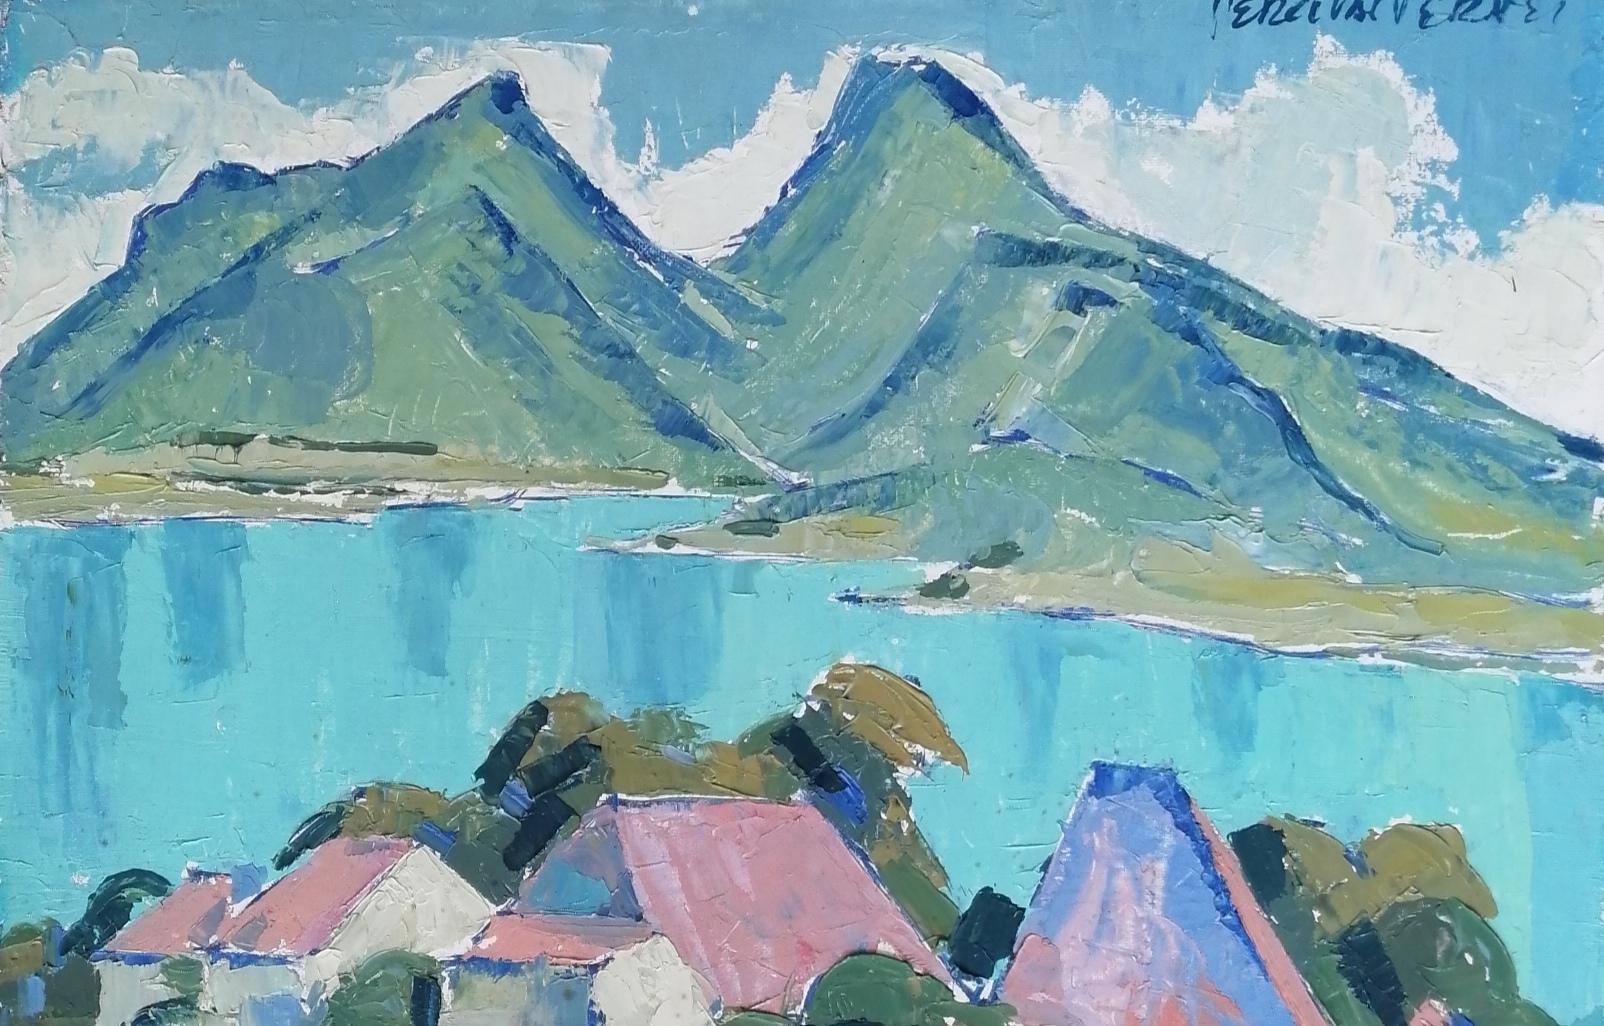 Lake Annecy - Painting by Percival Pernet